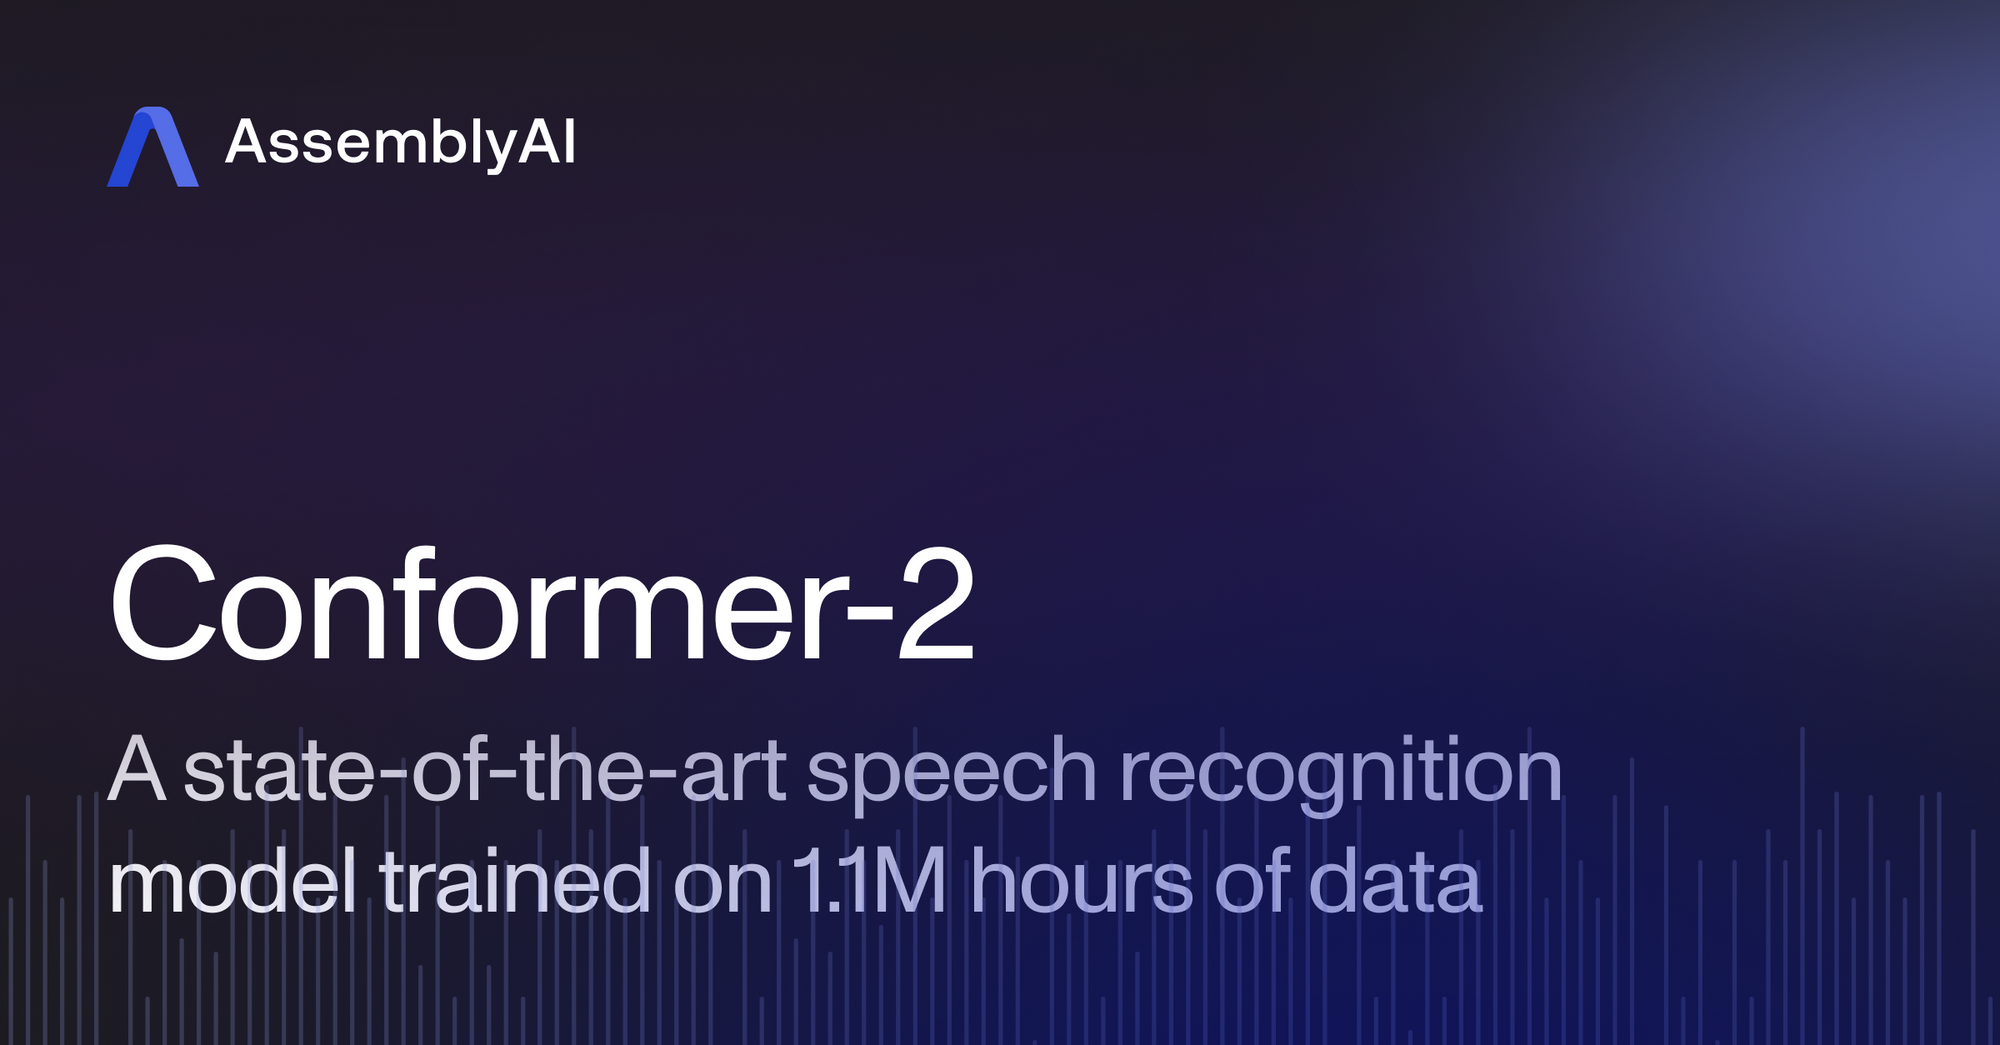 Conformer-2: a state-of-the-art speech recognition model trained on 1.1M hours of data